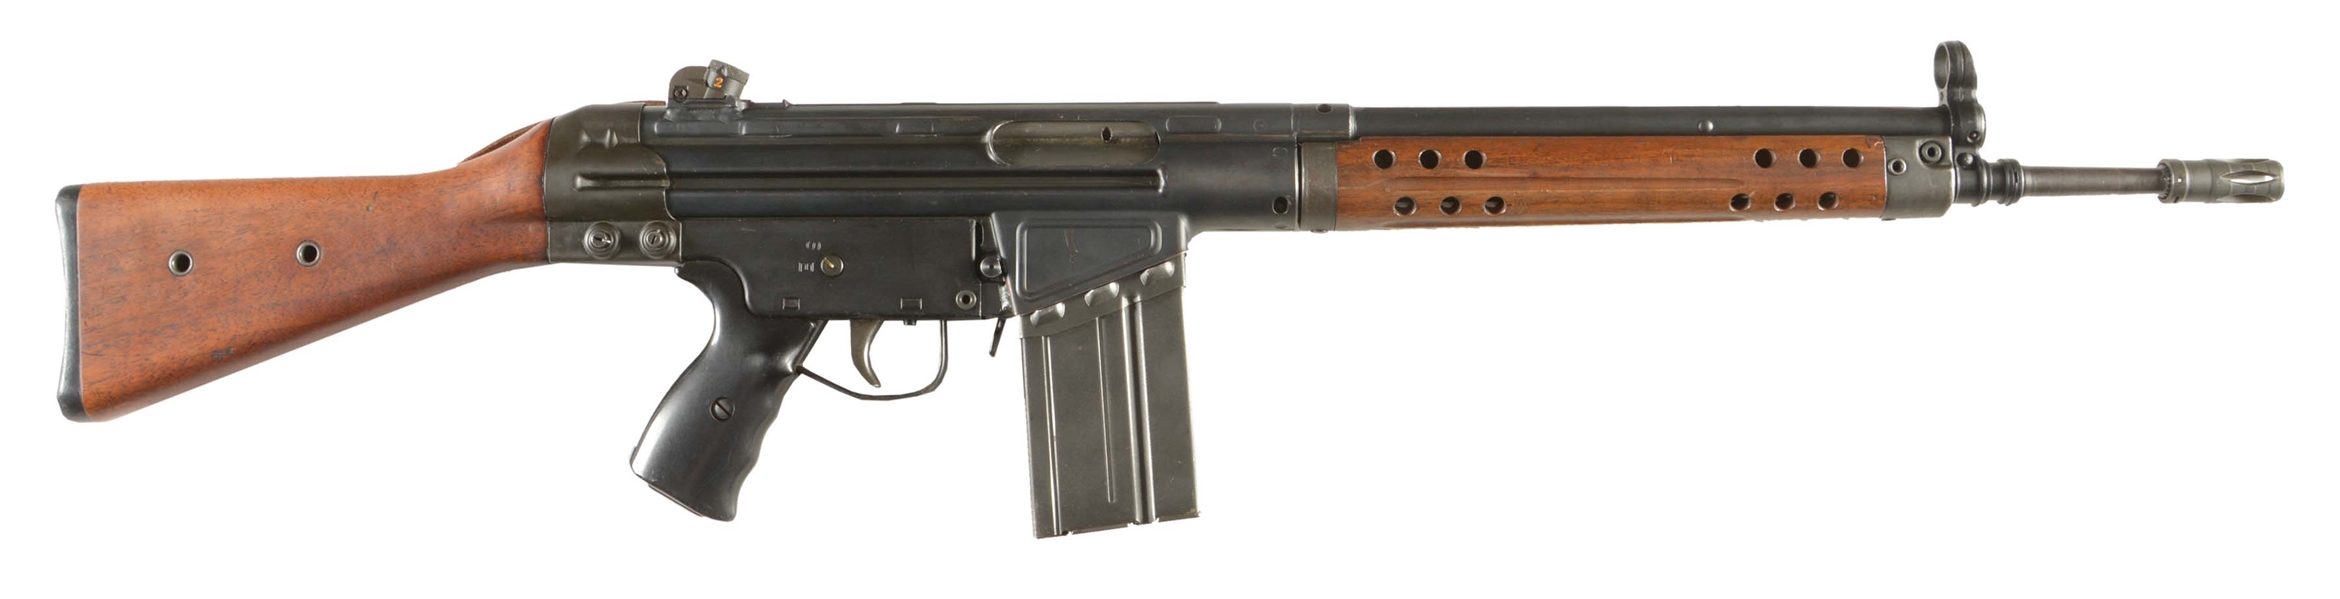 (C) SANTA FE DIVISON OF GOLDEN STATE ARMS CO. HK G3 SEMI-AUTOMATIC RIFLE.